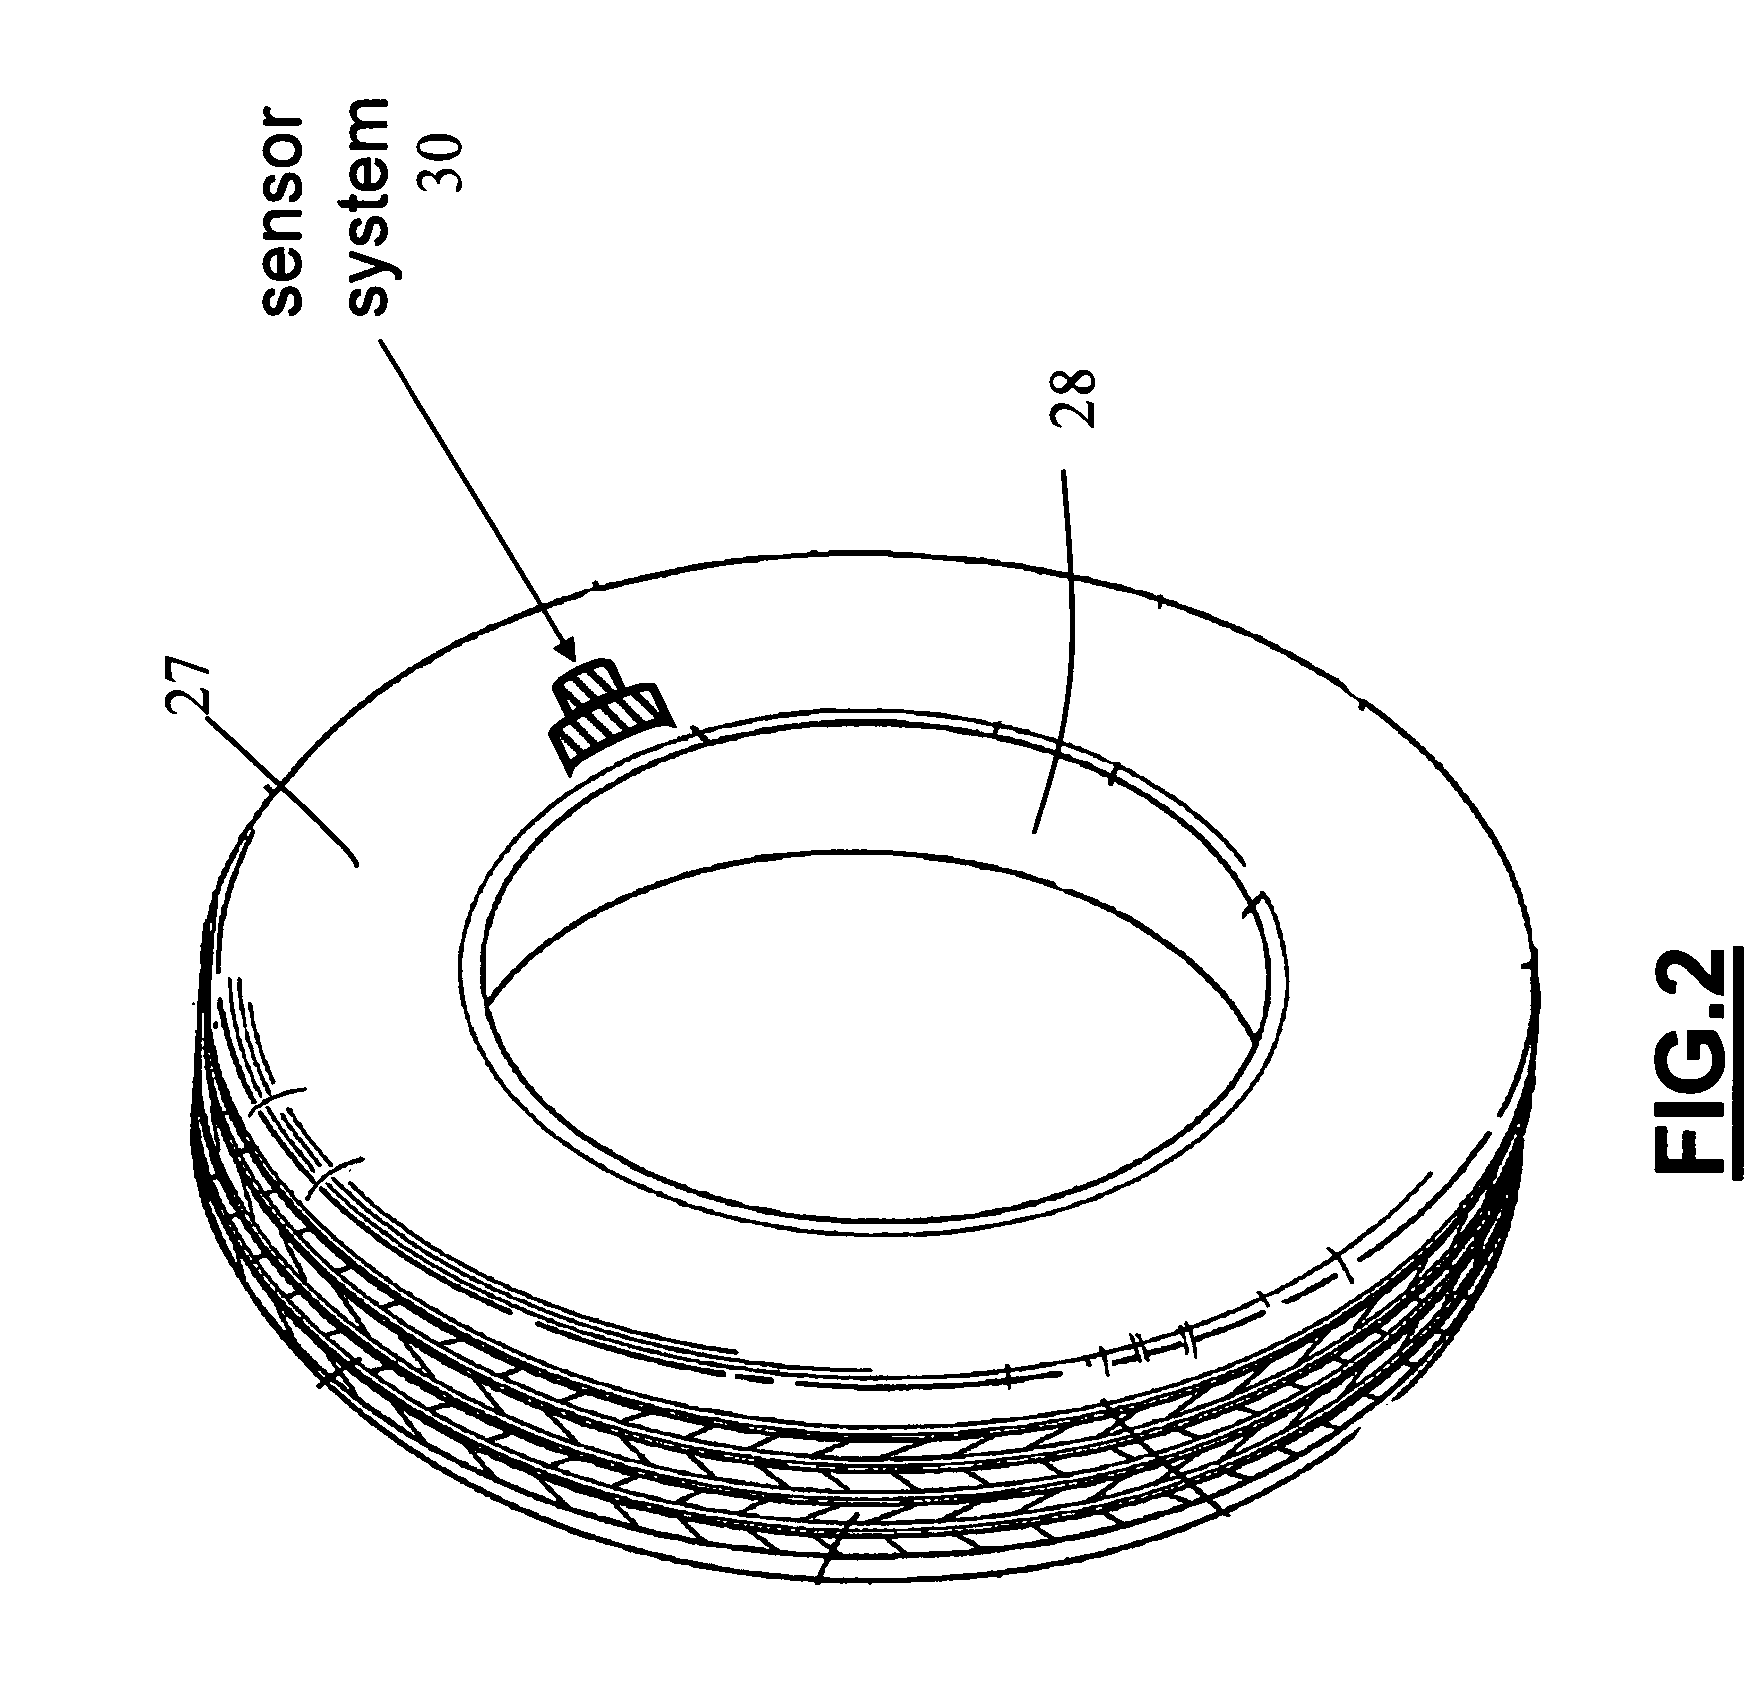 Tire parameter monitoring system with inductive power source